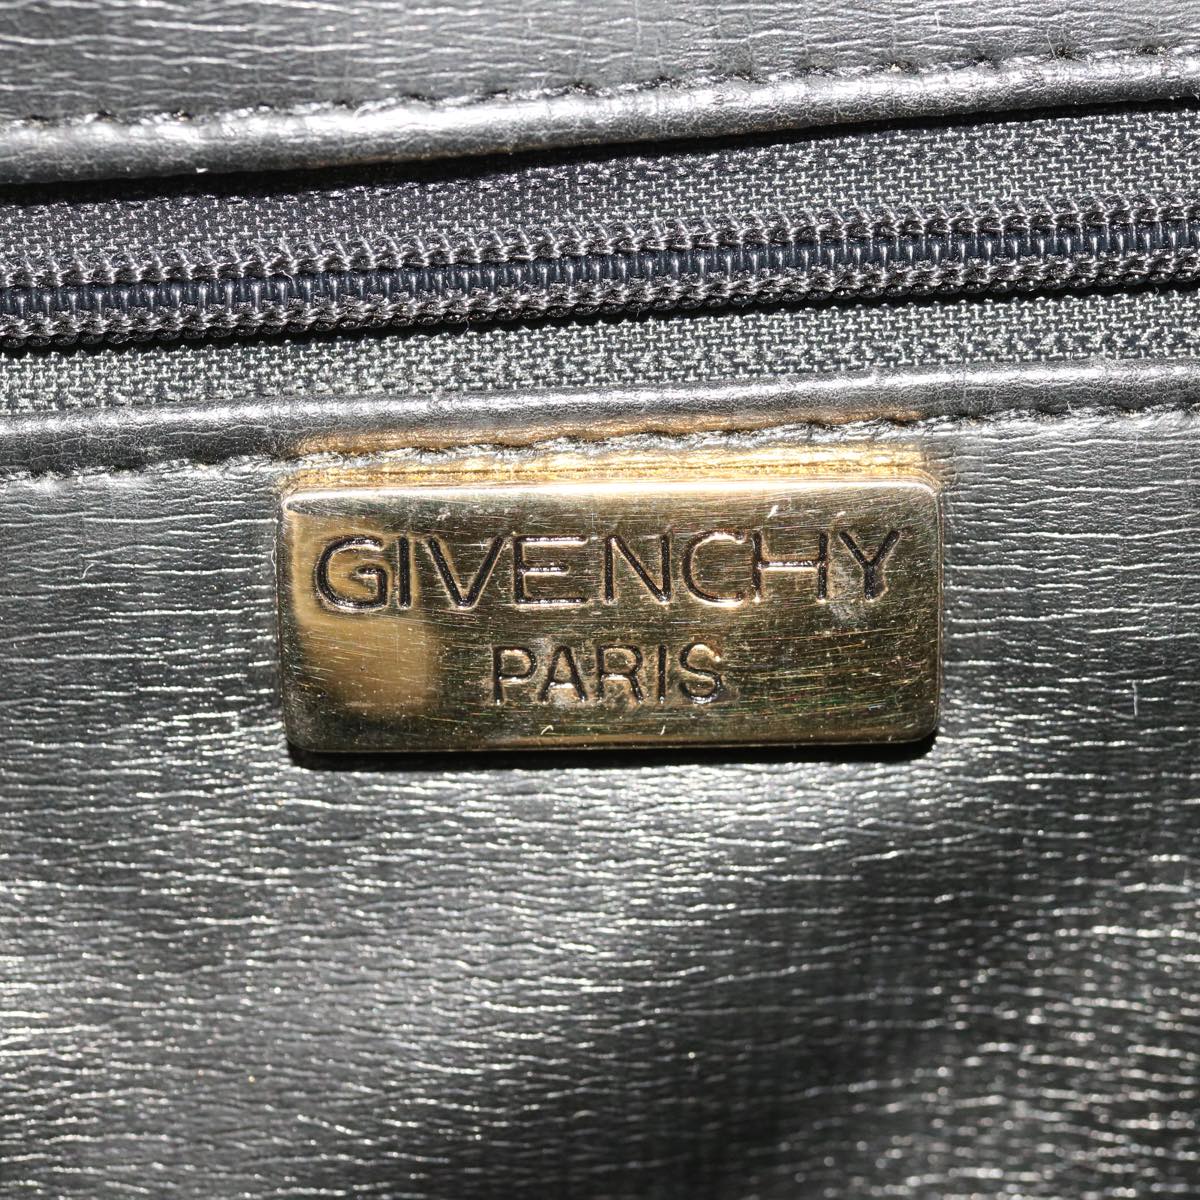 GIVENCHY Quilted Chain Shoulder Bag Leather Black Auth am5724